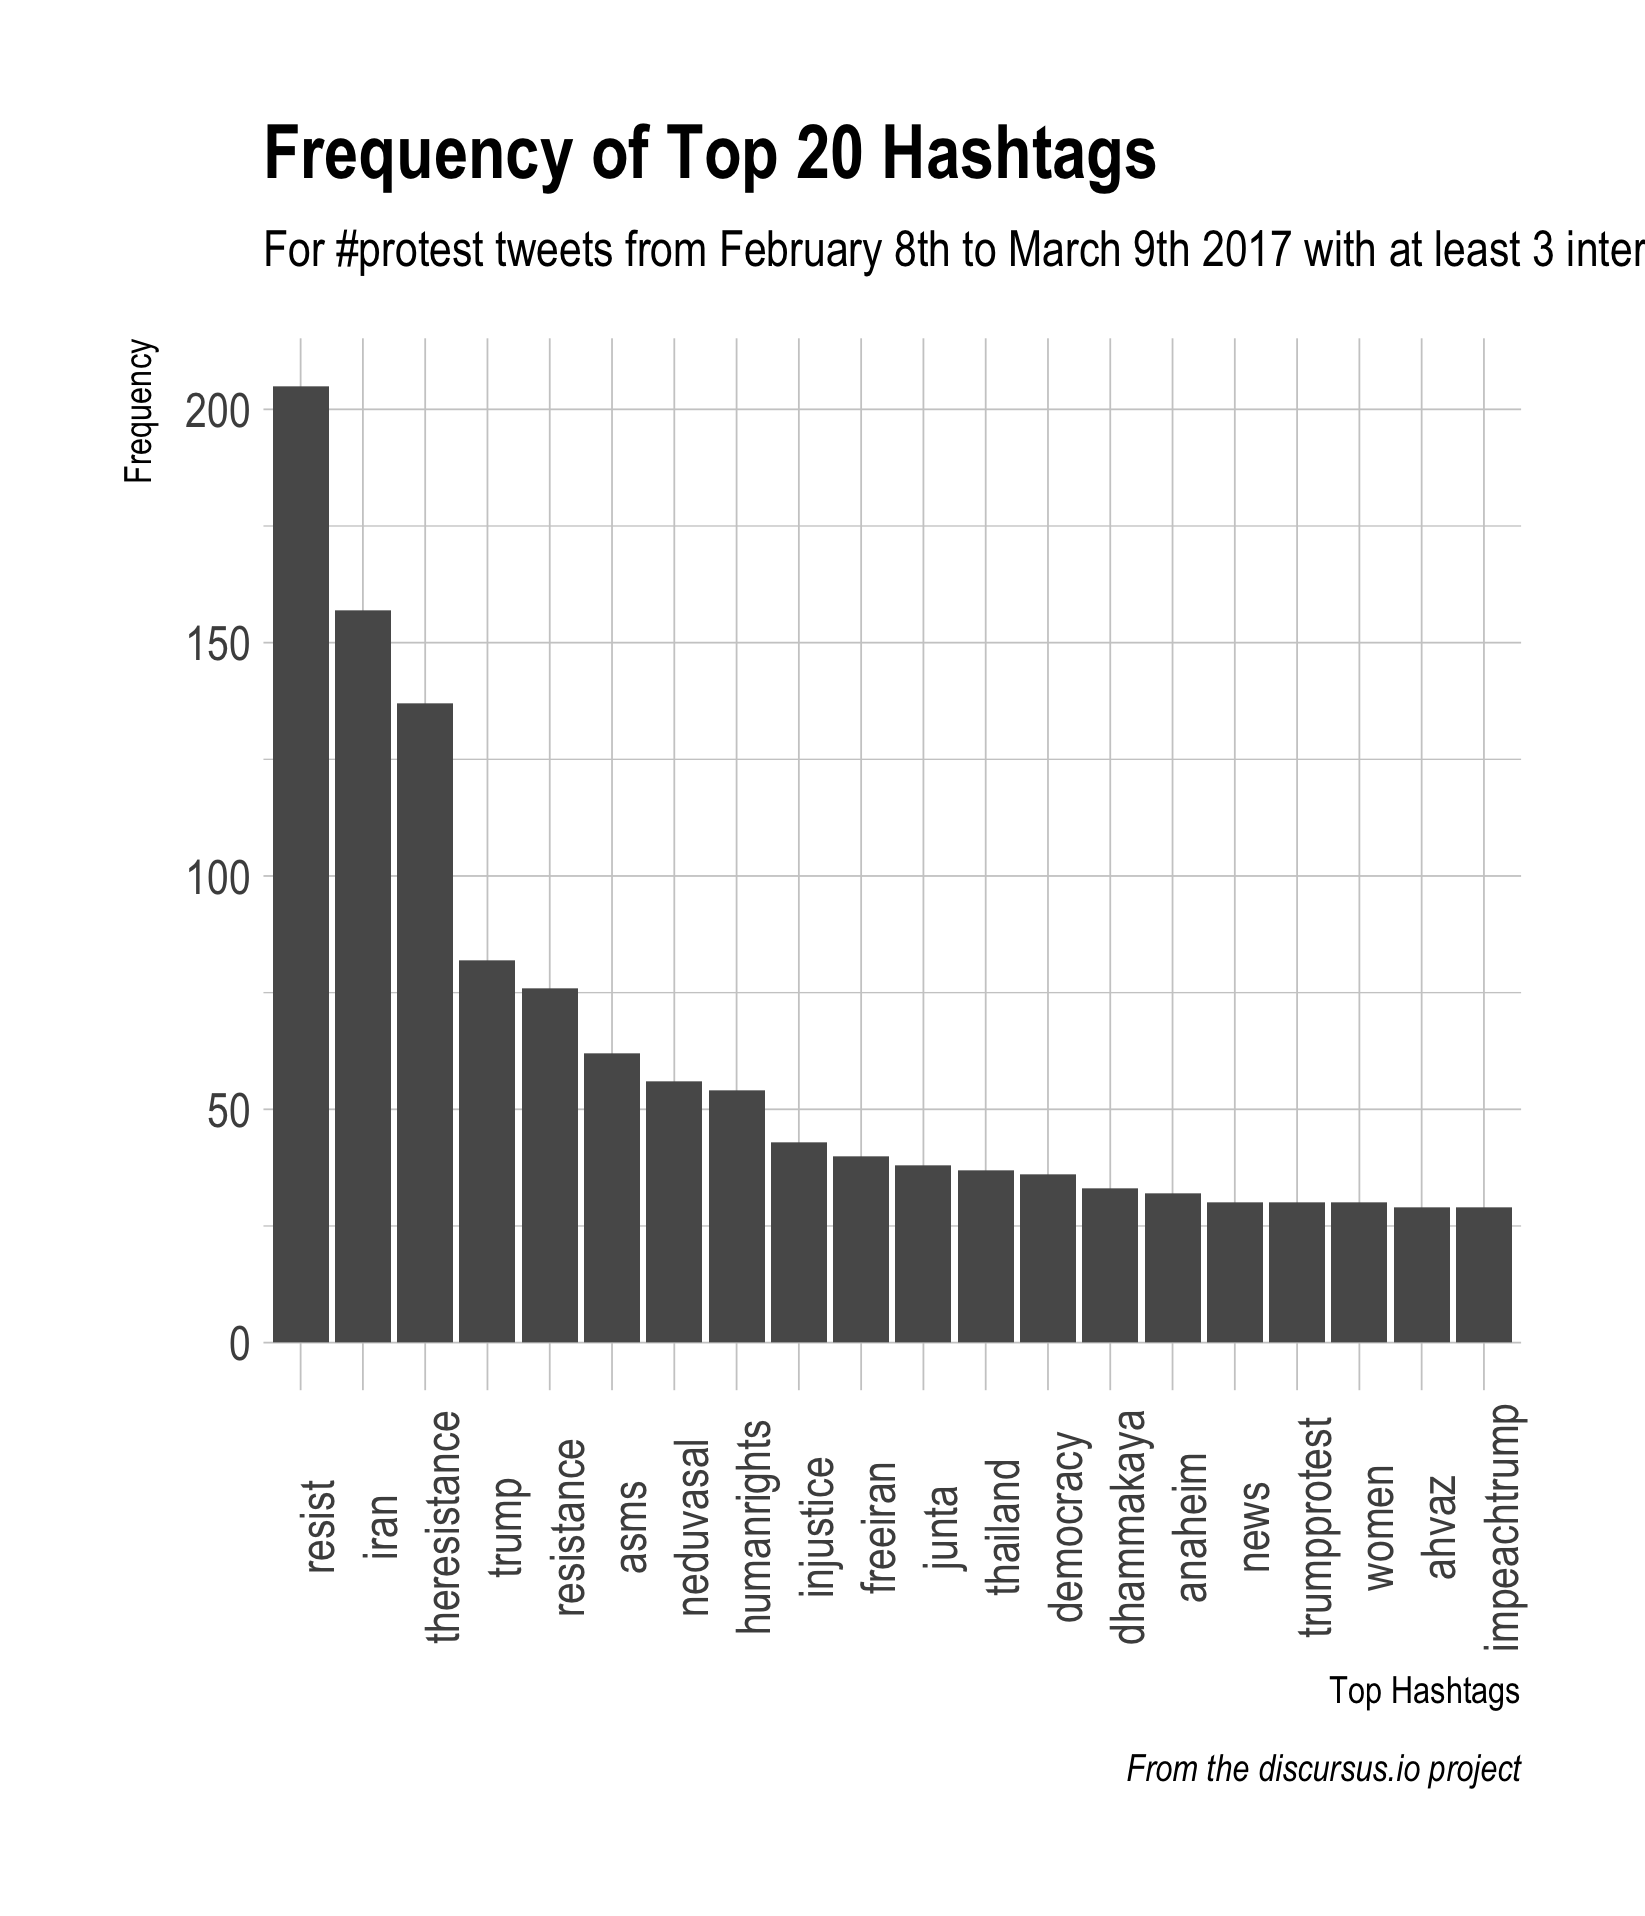 discursus.io - Topic Extraction - Top Hashtags